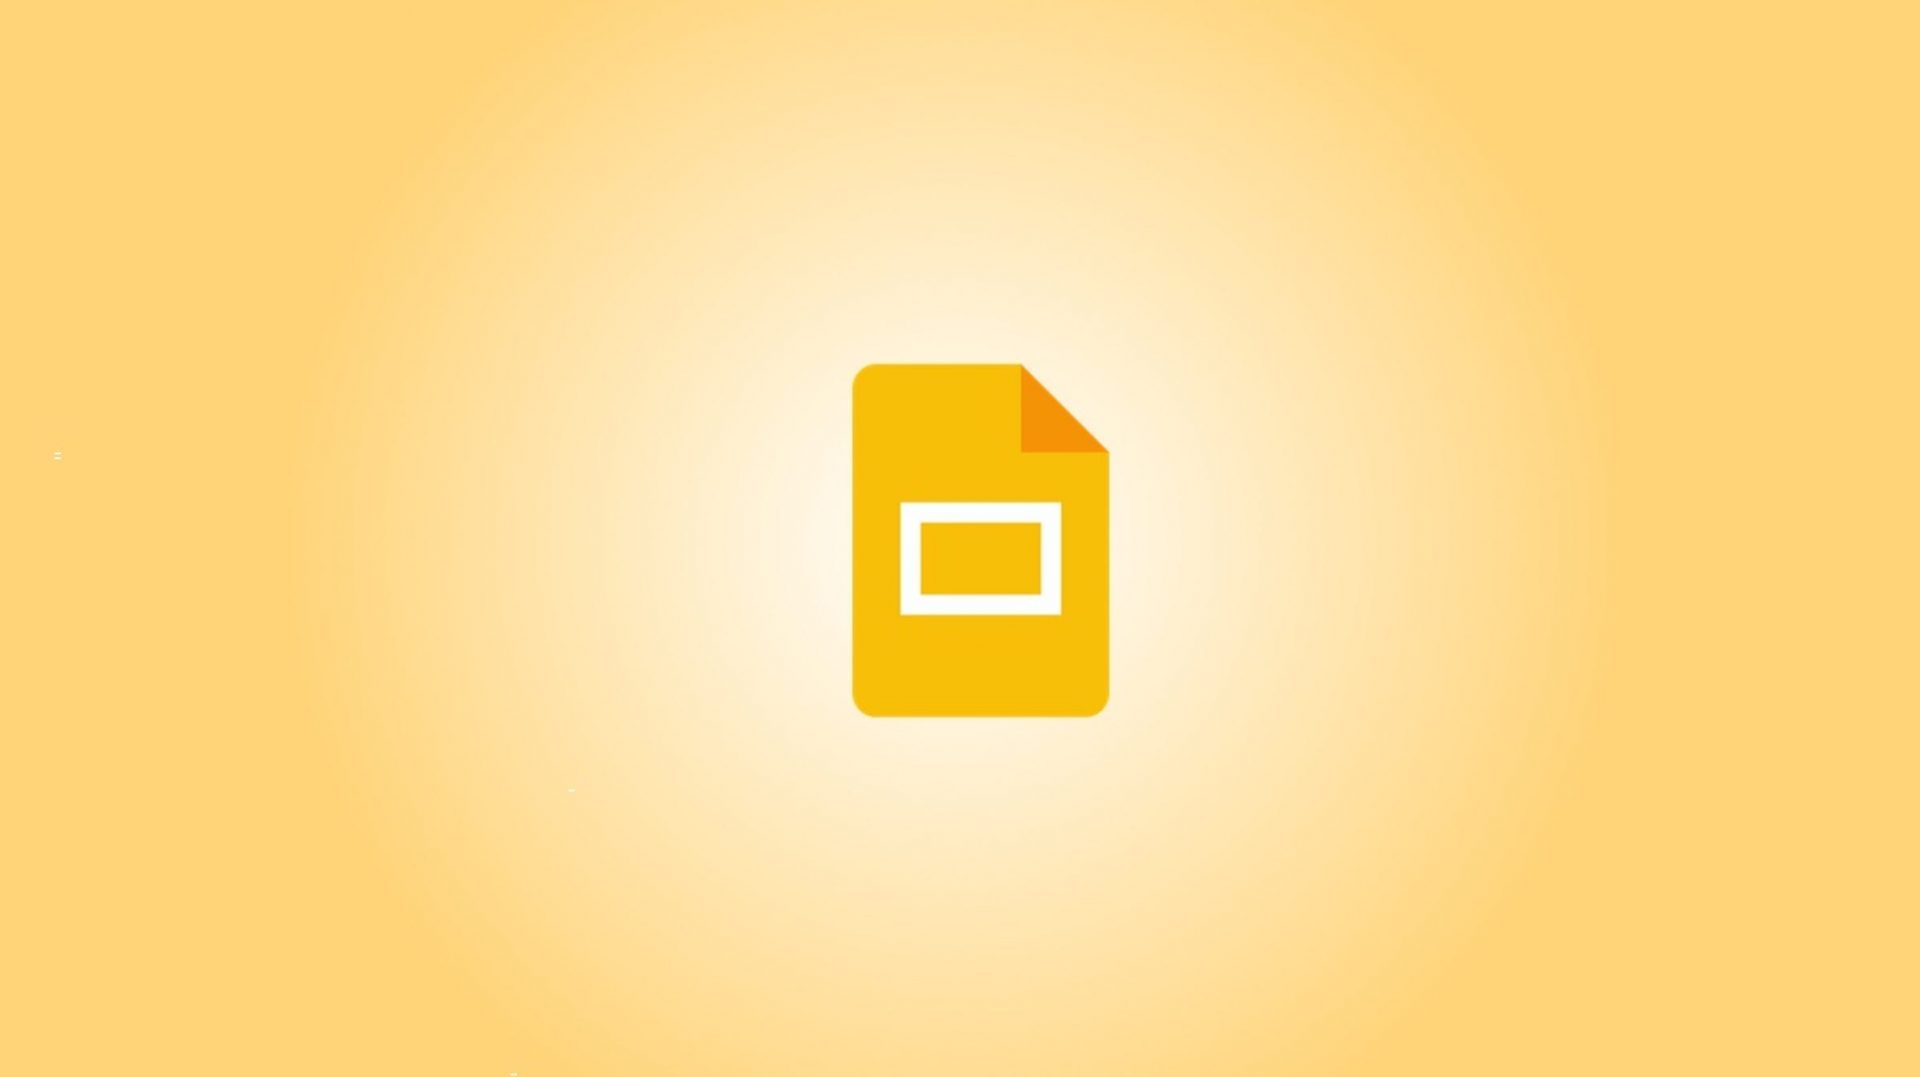 The particular way to Expend Speaker Notes in Google Slides